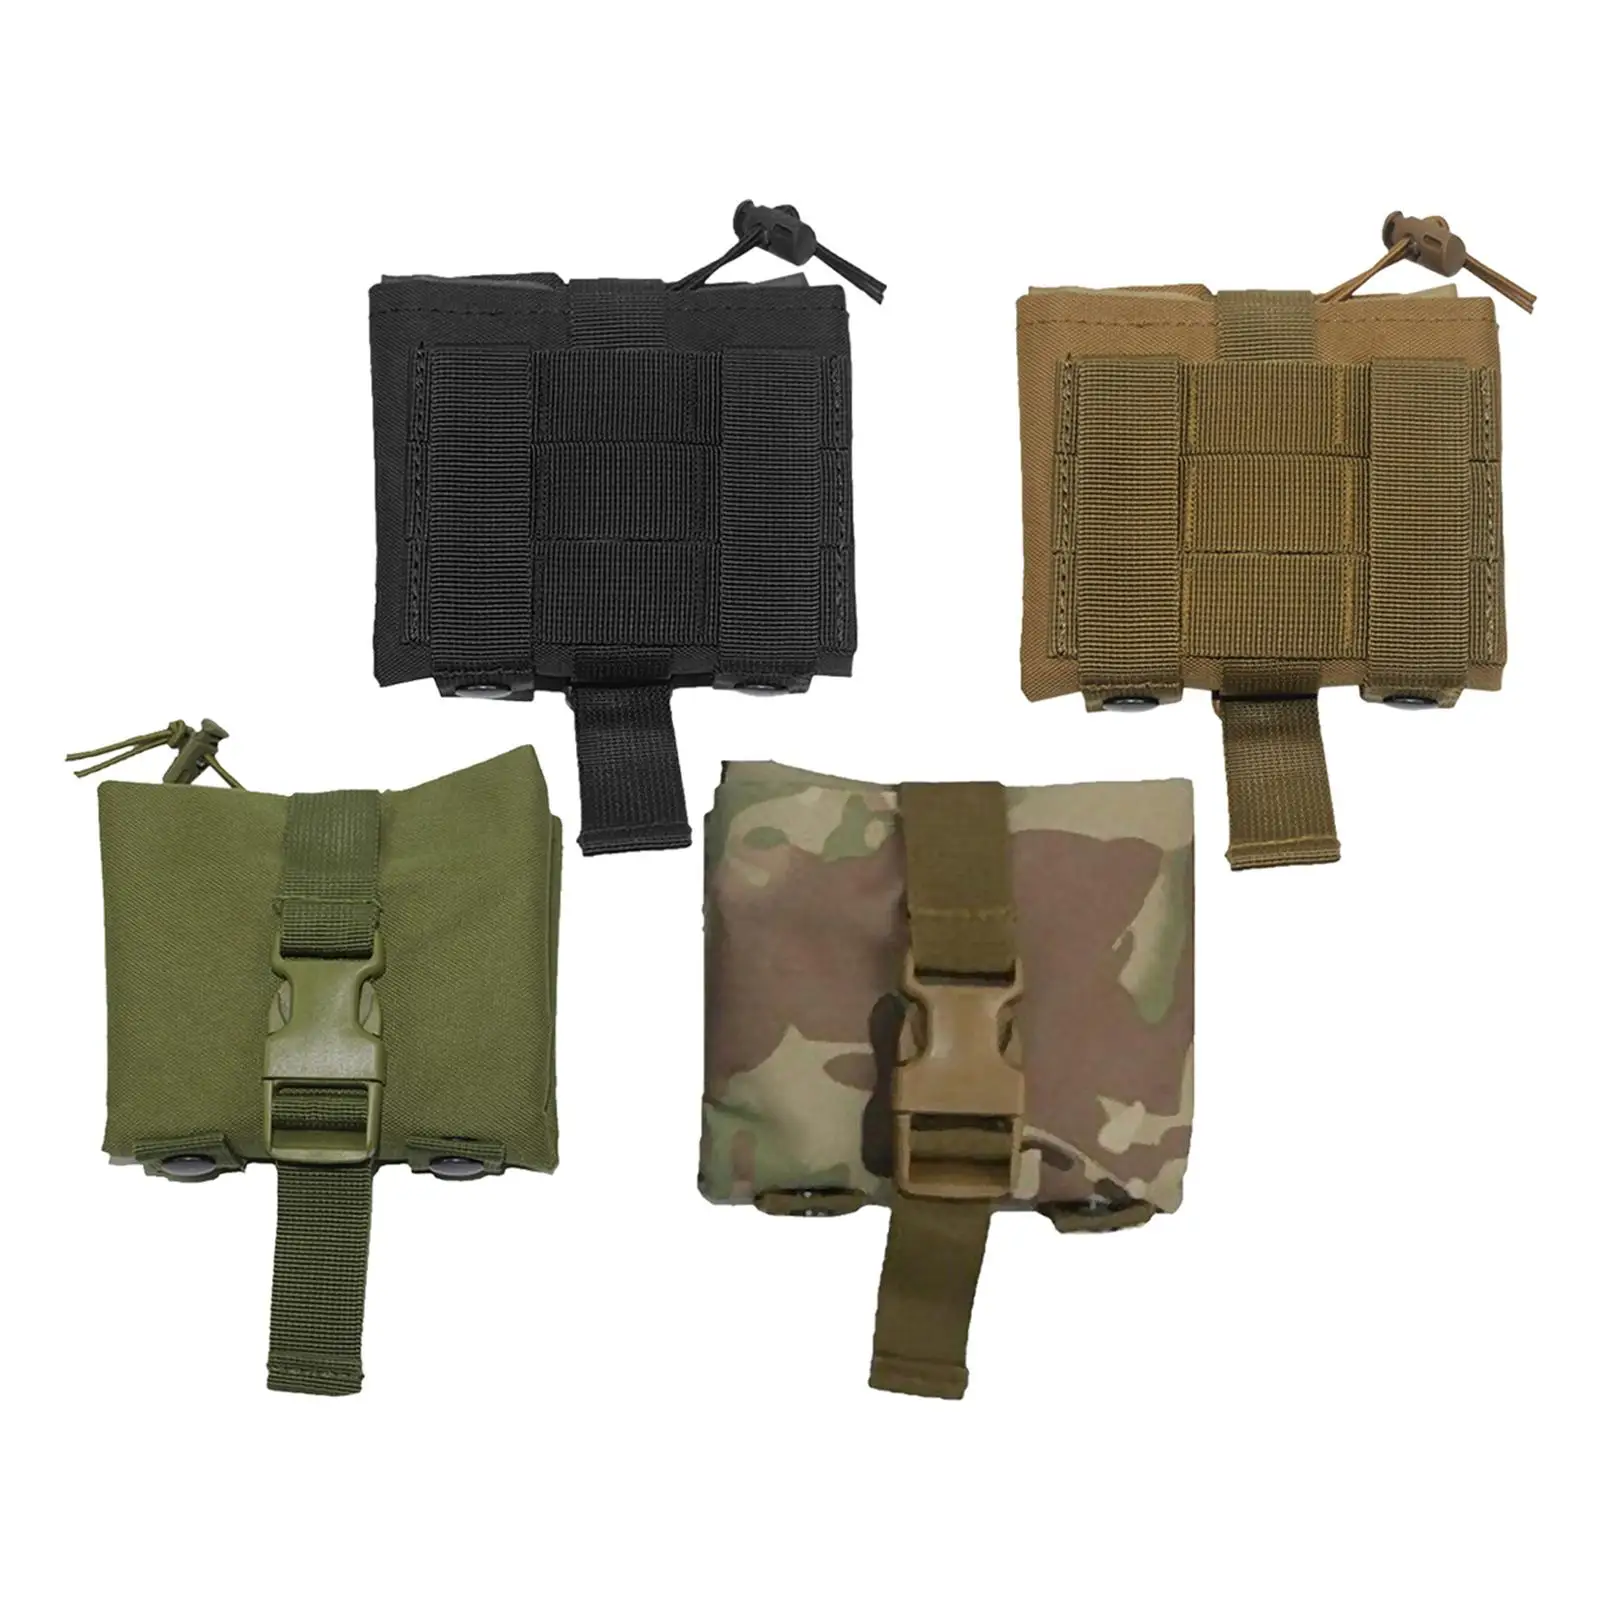 Dump Pouch Folding Adjustable for Outdoor Activities Hiking